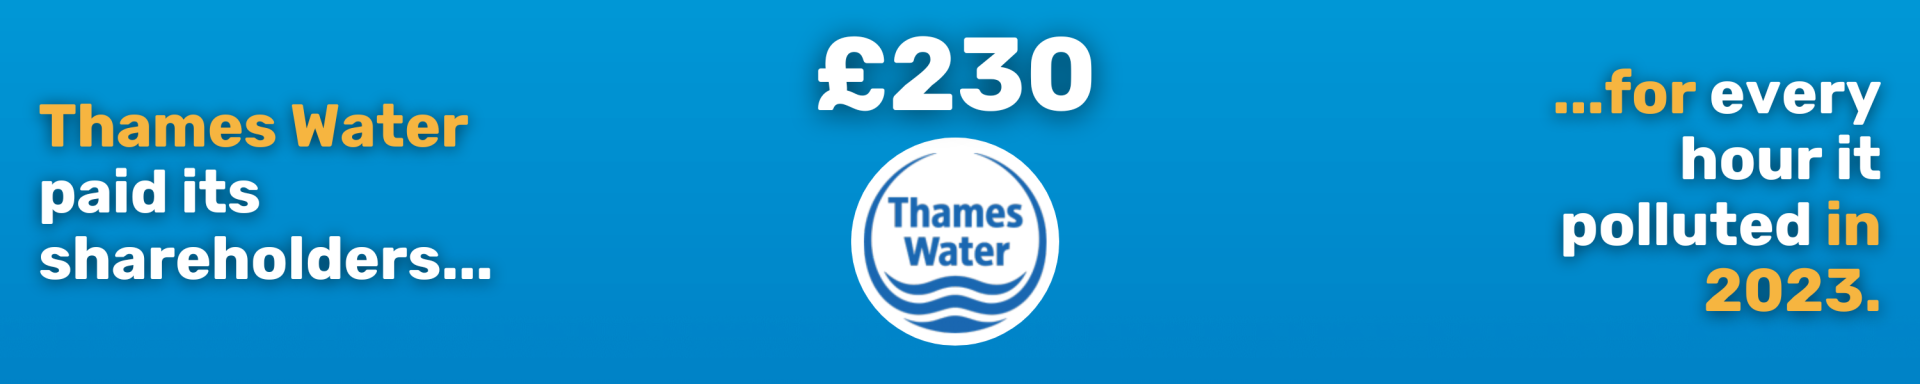 Text reads: "Thames Water paid its shareholders £230 for every hour it polluted in 2023."